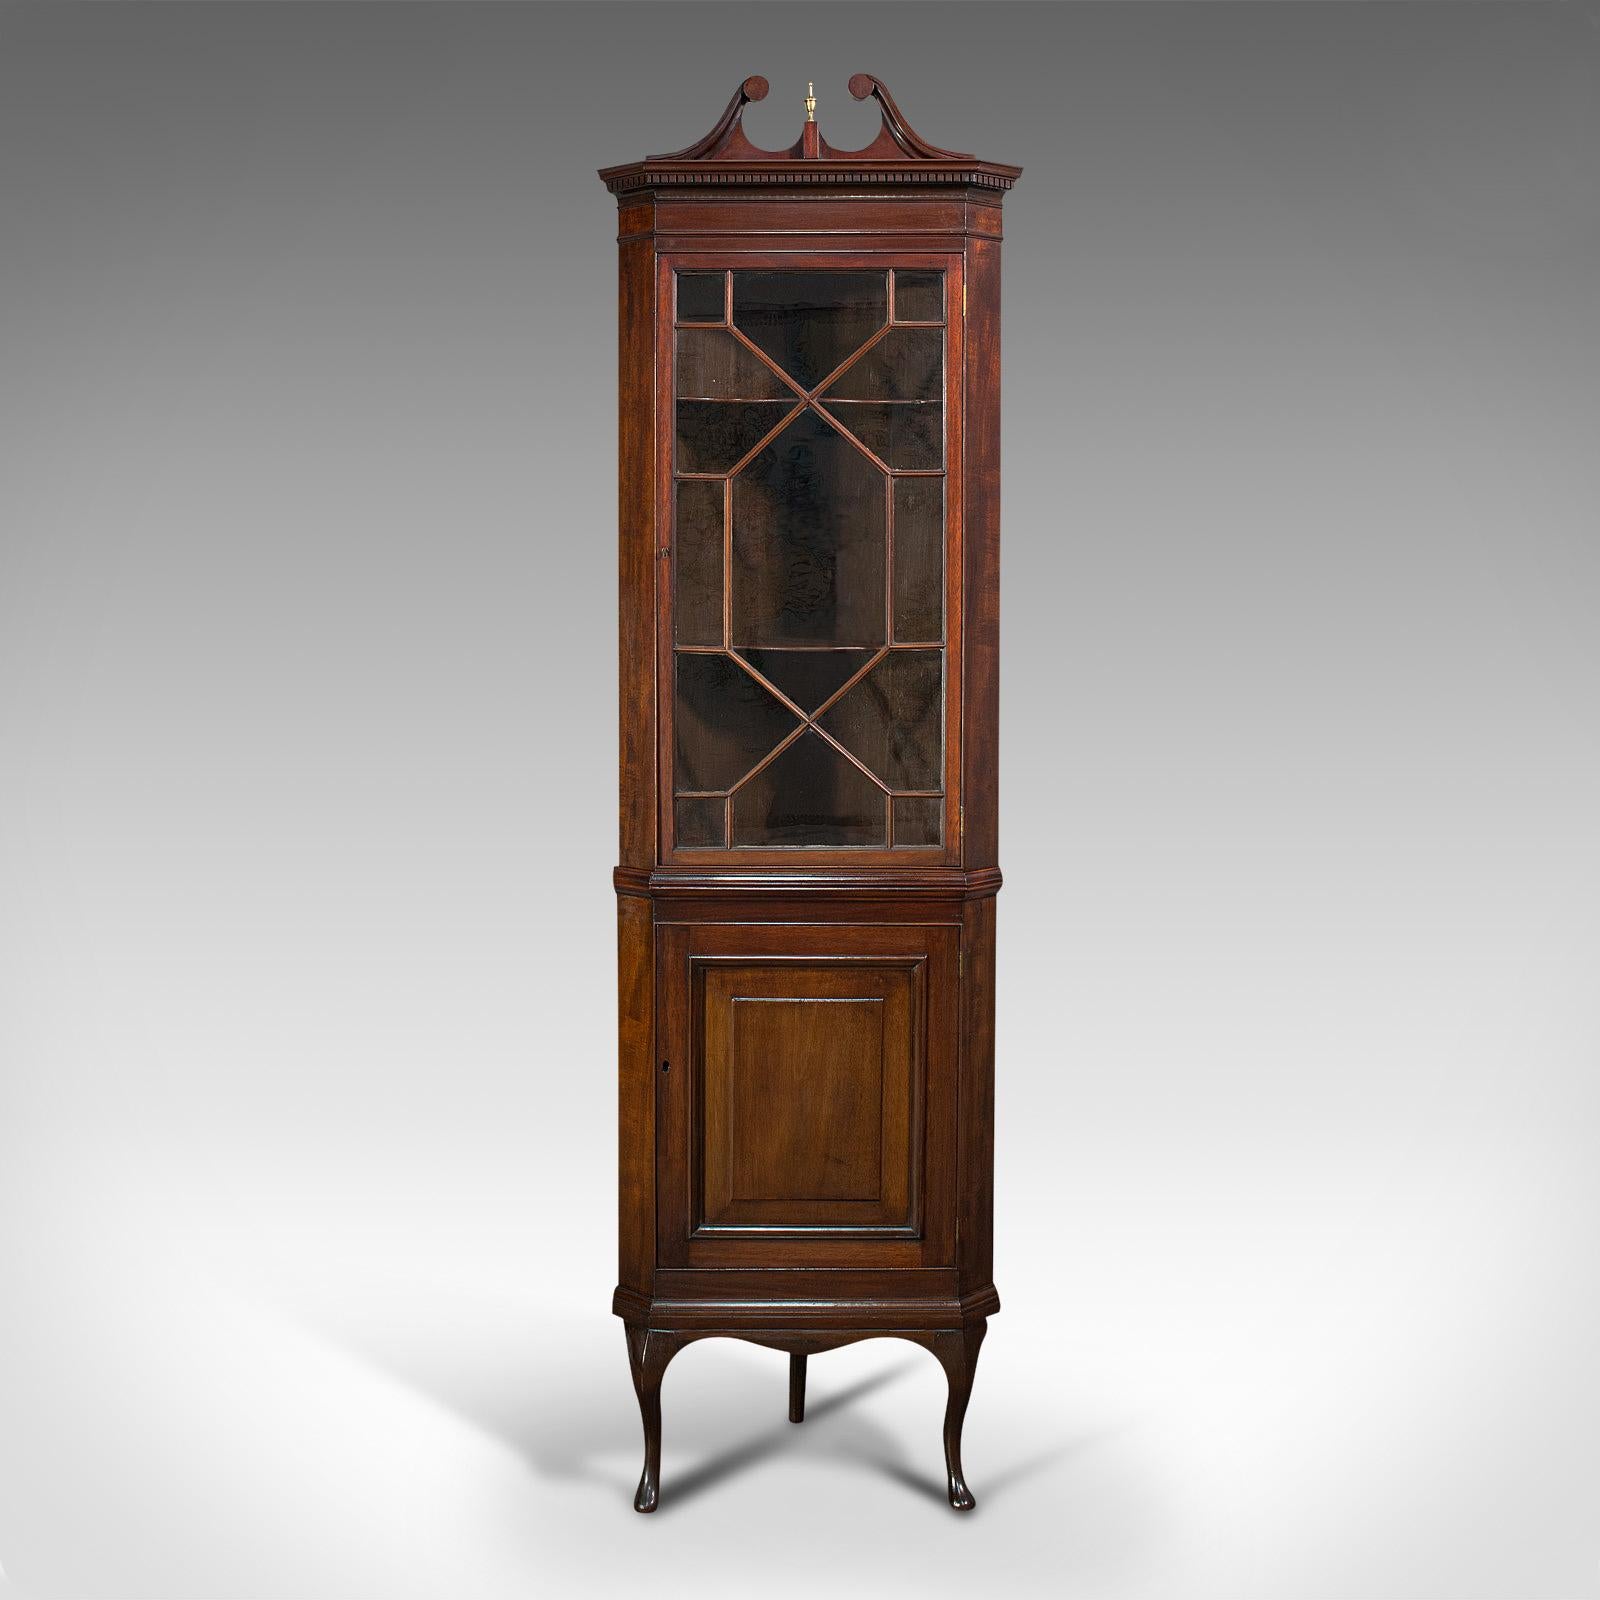 This is a rare, tall antique corner cabinet. An English, mahogany display cupboard on base in Georgian revival taste, dating to the Victorian period, circa 1880.

Impressive and of room height at 7'
Displaying a desirable aged patina, in very